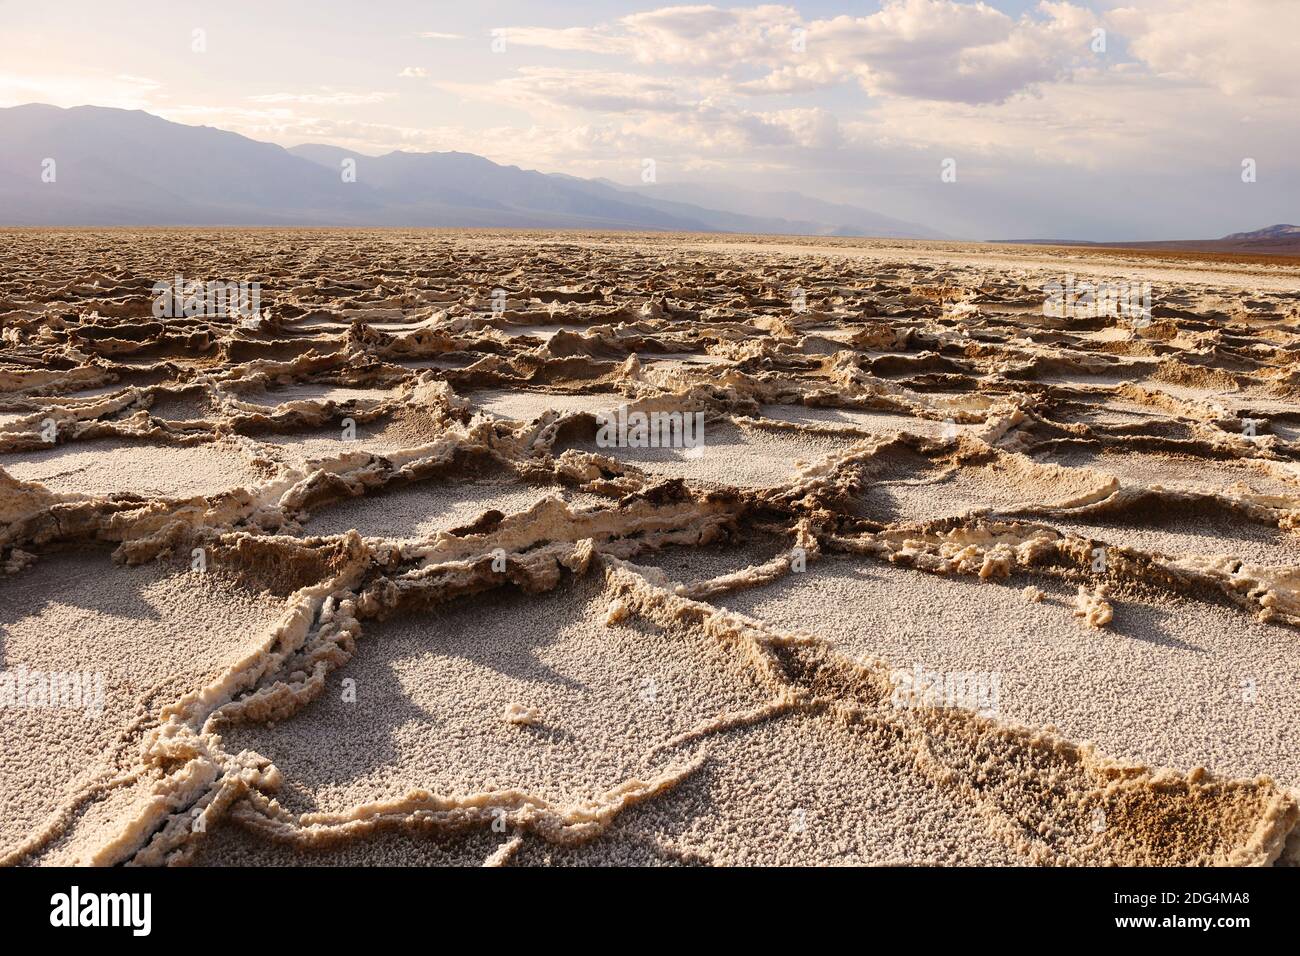 Death Valley, Valley of Death, California, USA Stock Photo